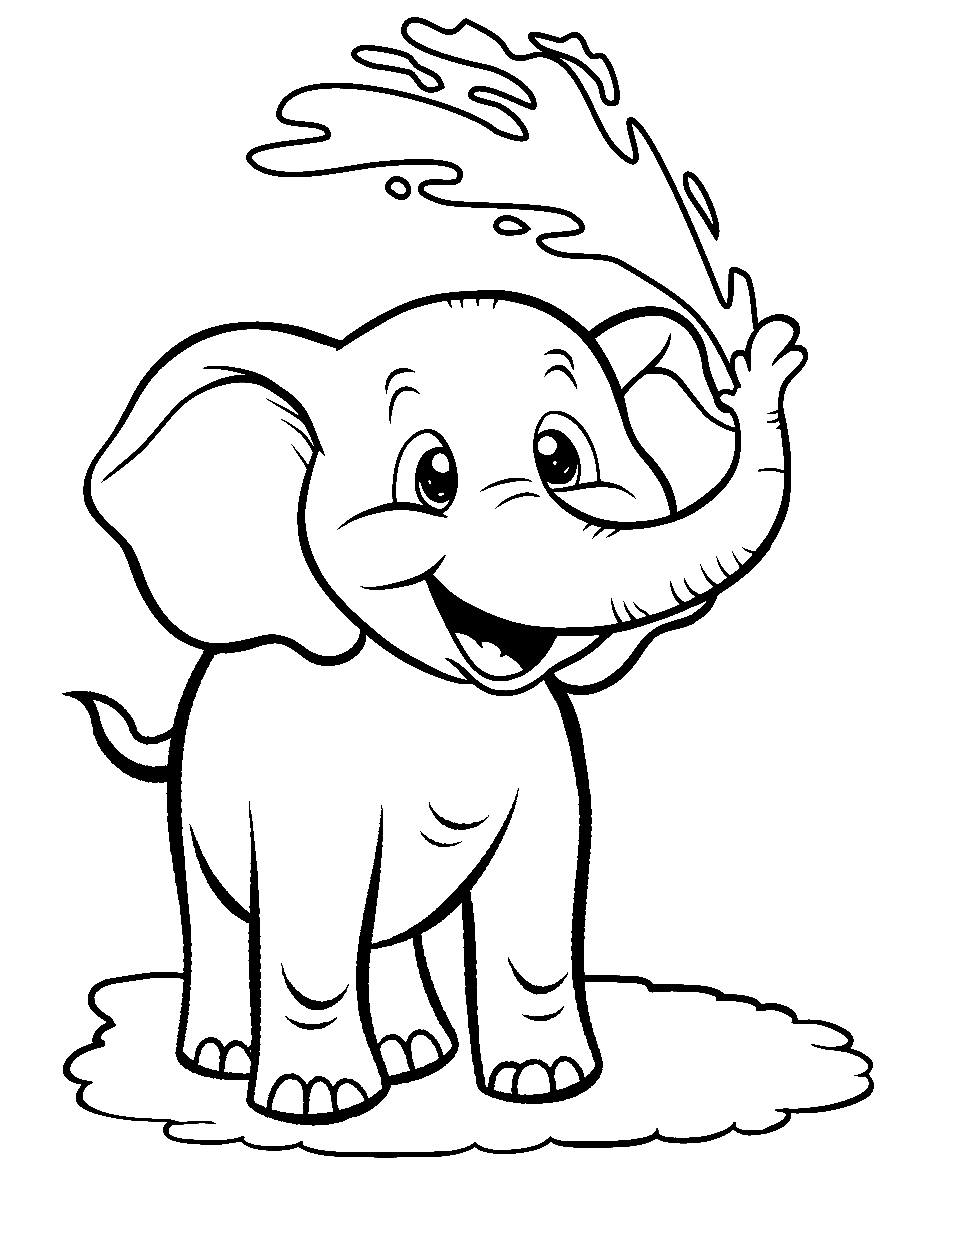 Elephant Excitement Coloring Page - An elephant spraying water from its trunk.